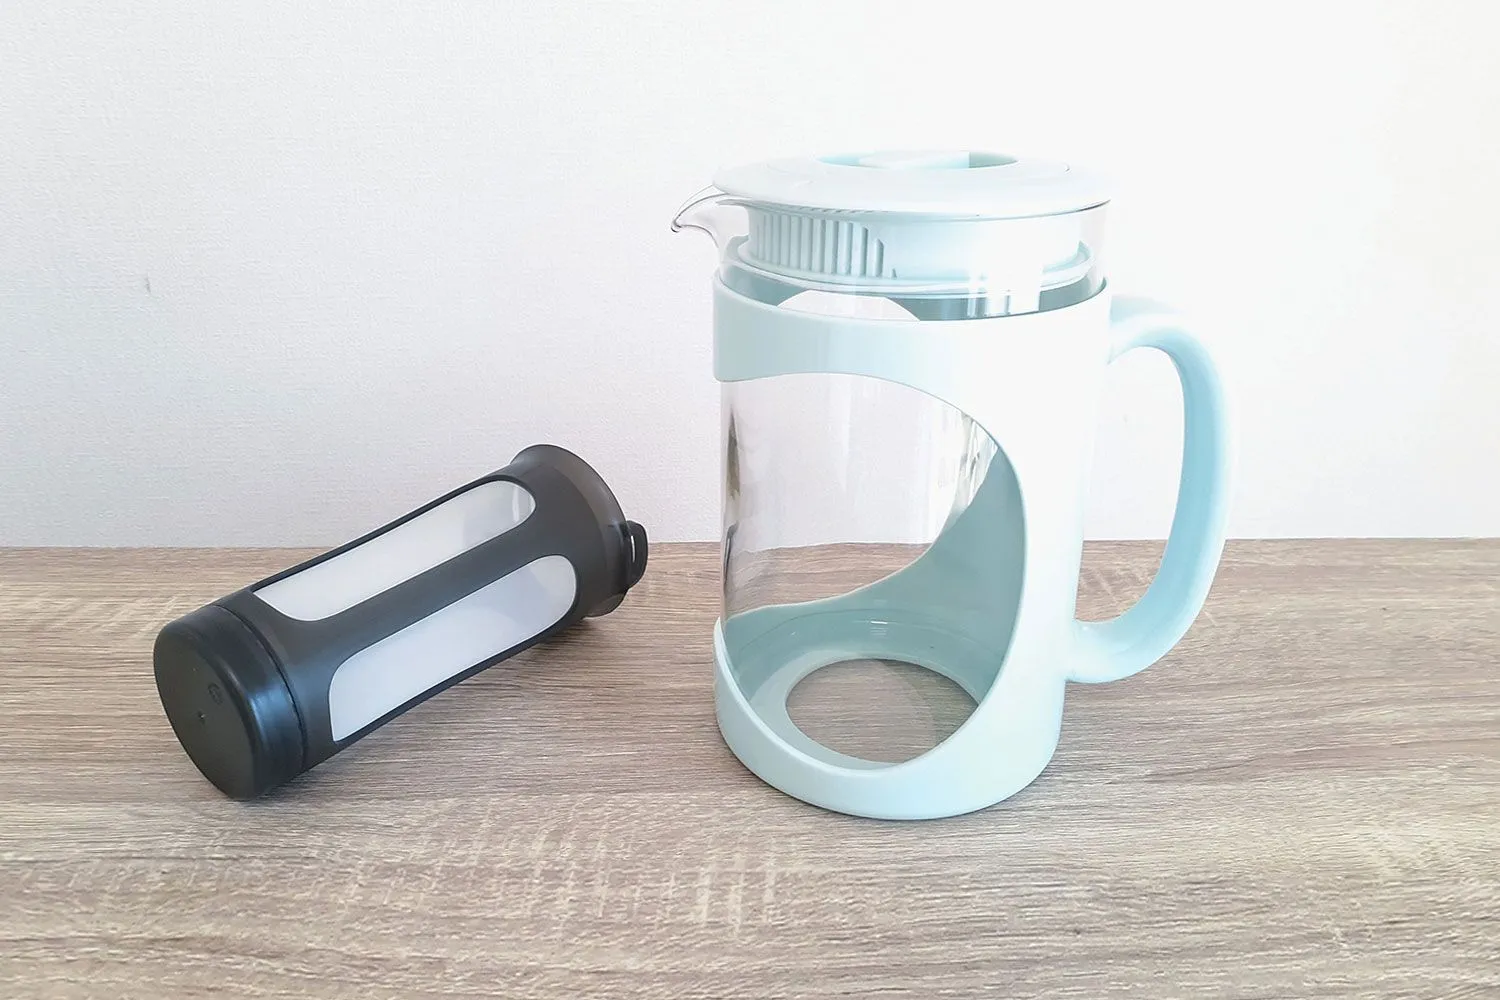 The Primula Burke Cold Brew Maker Is Ideal for Solo Coffee Lovers